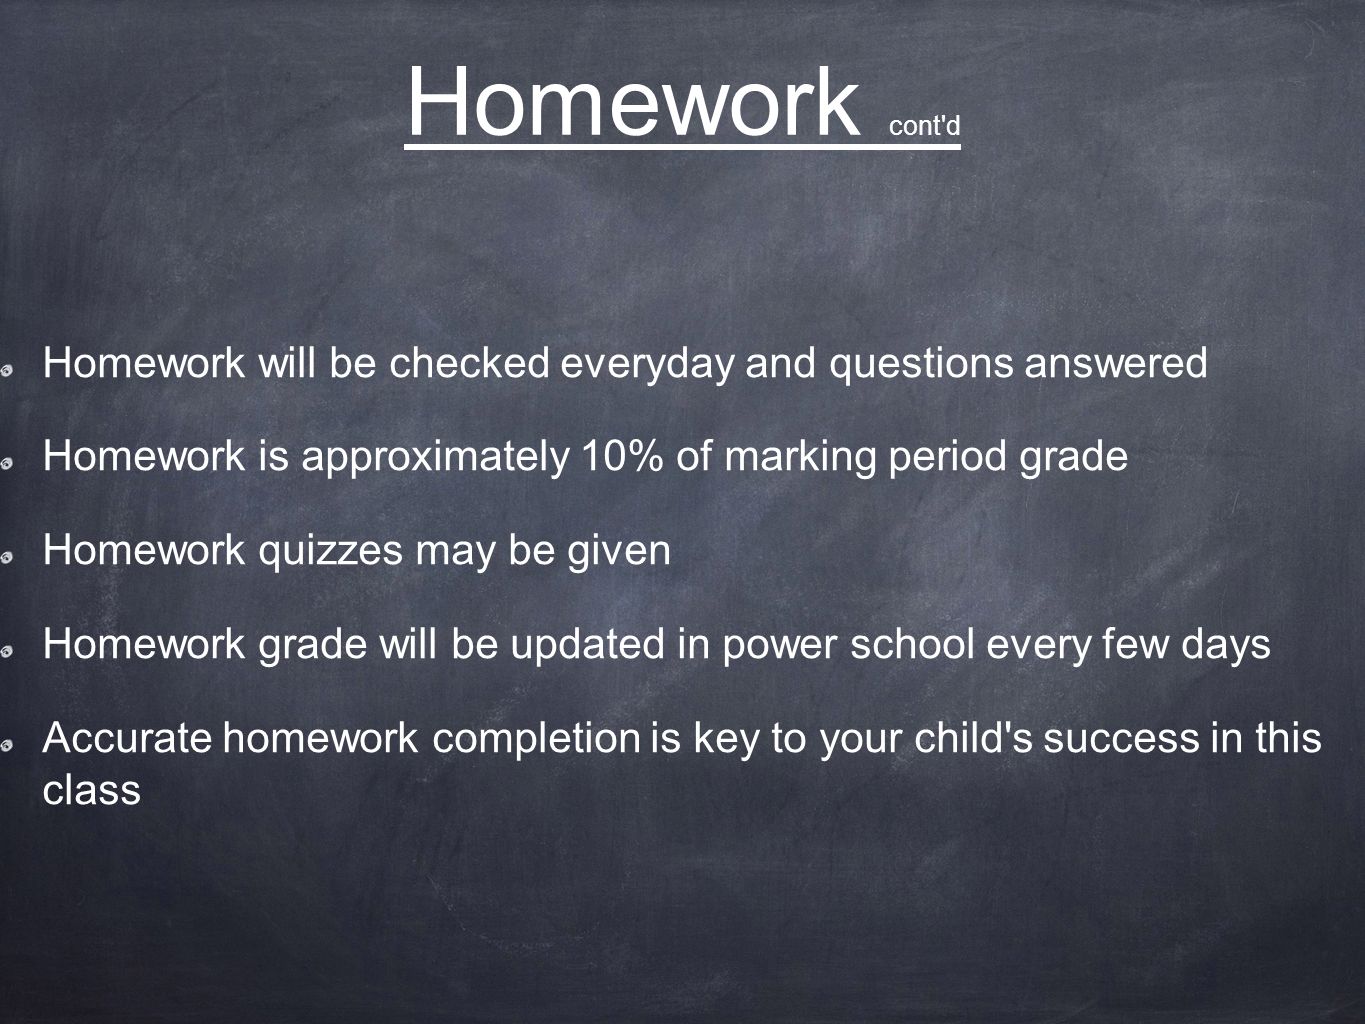 Homework cont d Homework will be checked everyday and questions answered Homework is approximately 10% of marking period grade Homework quizzes may be given Homework grade will be updated in power school every few days Accurate homework completion is key to your child s success in this class